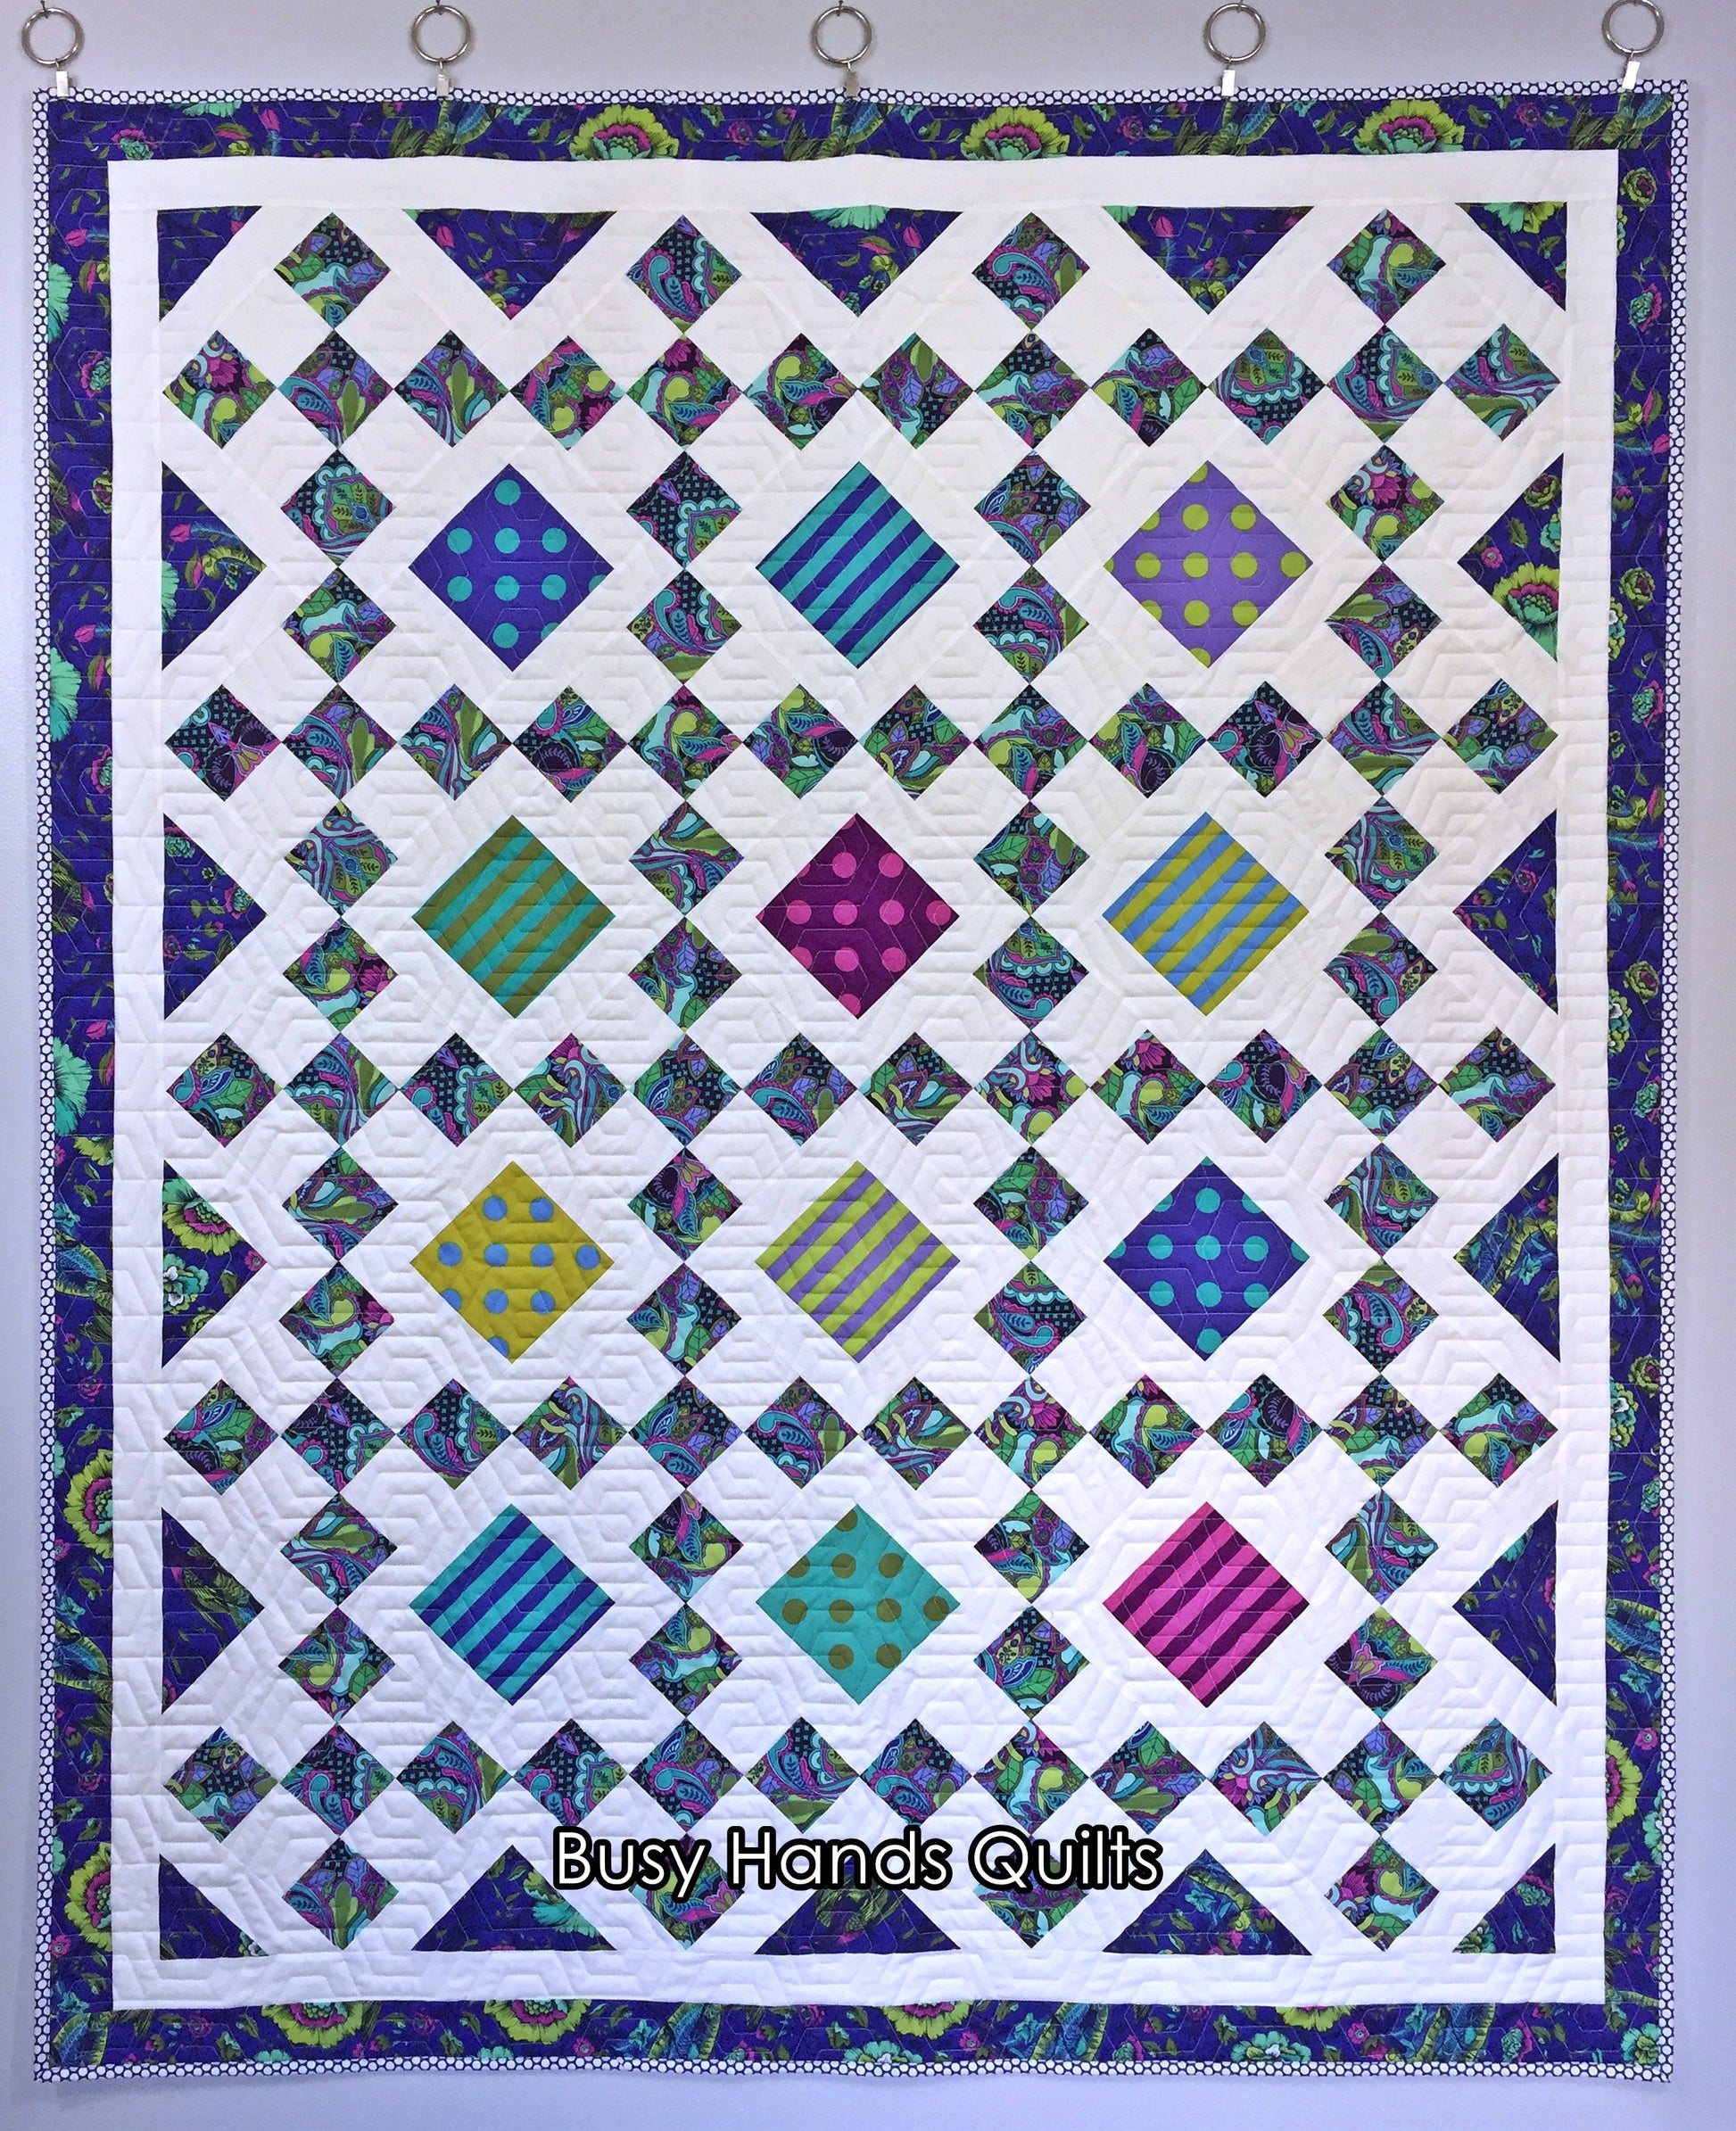 Granny's Square Patch Quilt Pattern PDF DOWNLOAD Busy Hands Quilts $12.99